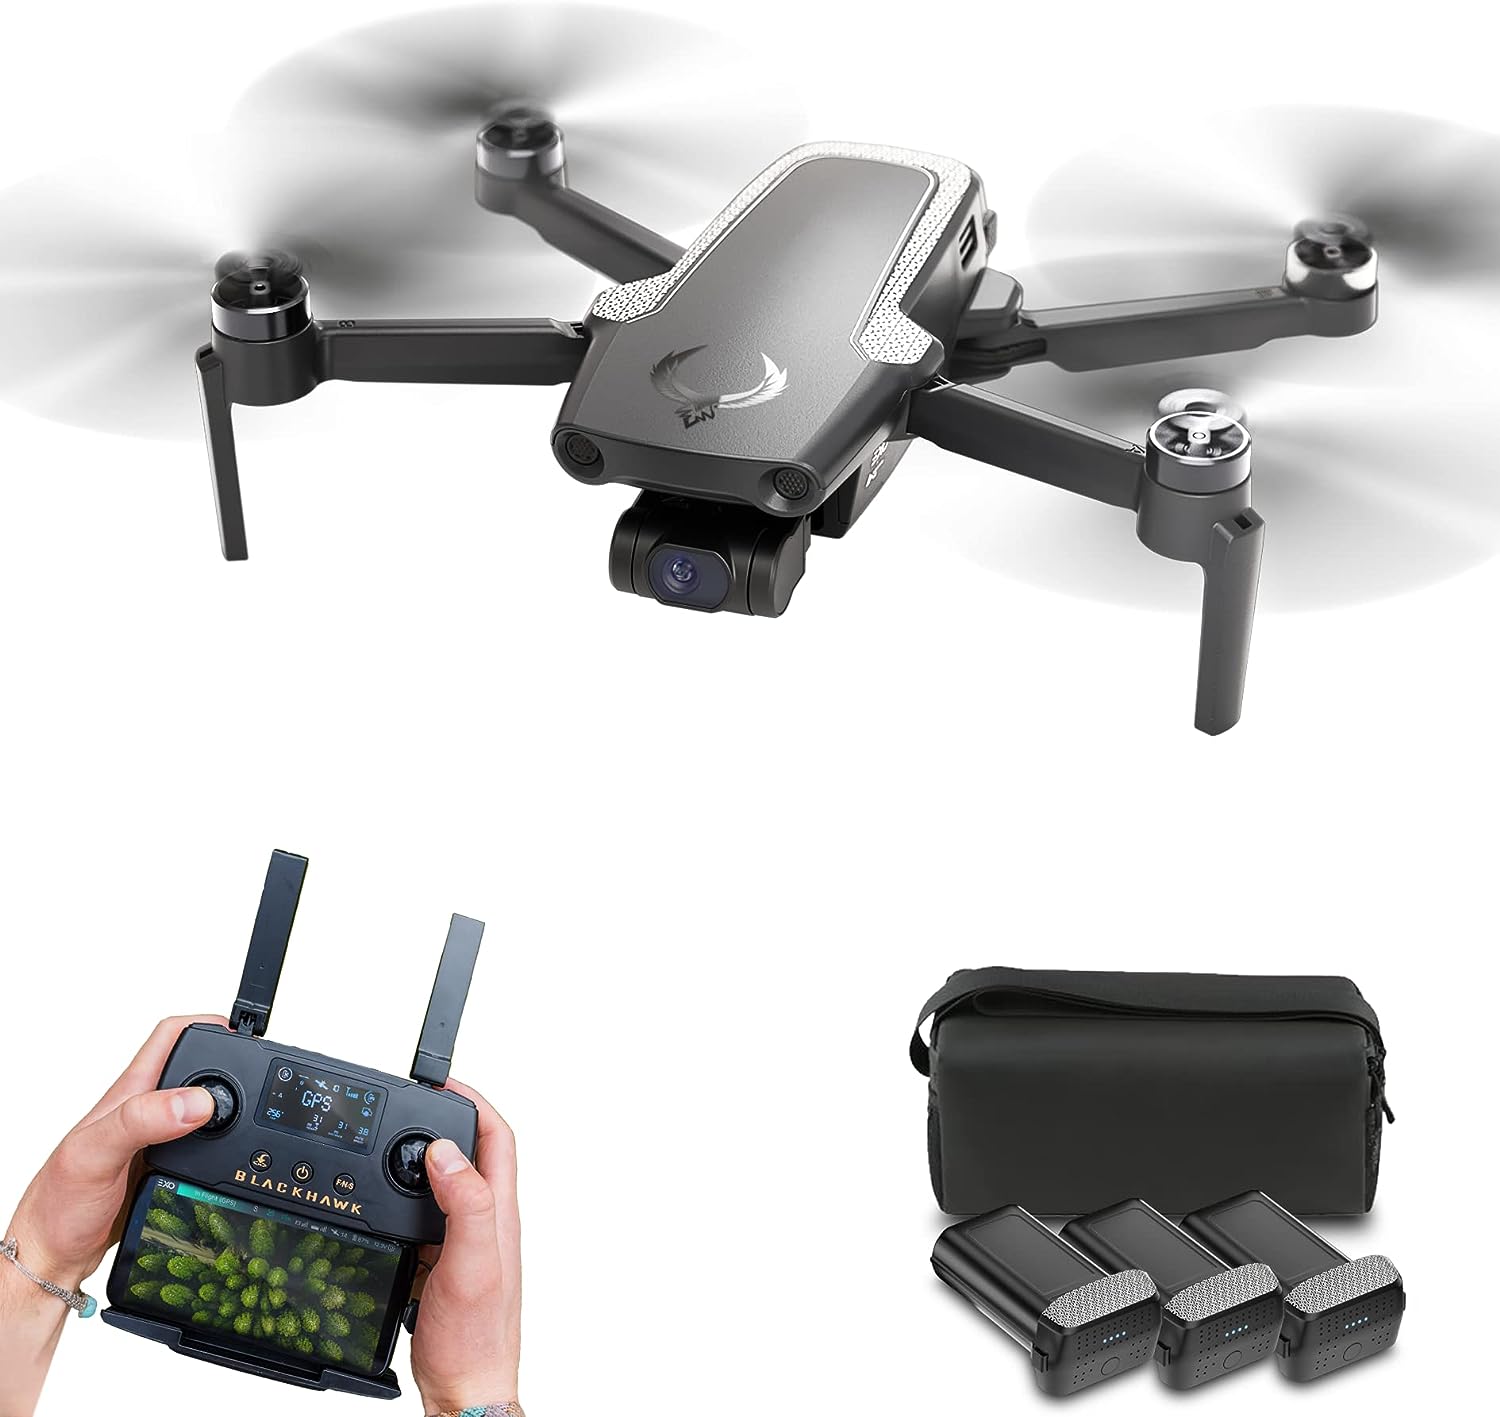 EXO Mini – Professional 4K UHD Long Range Drone – 40 Minute Battery Life, 4K Camera, 5 Mile Range, 12MP Photo, Follow-Me, Return to Home, 15 more – Ready to Fly & Case Included – 3 Batteries